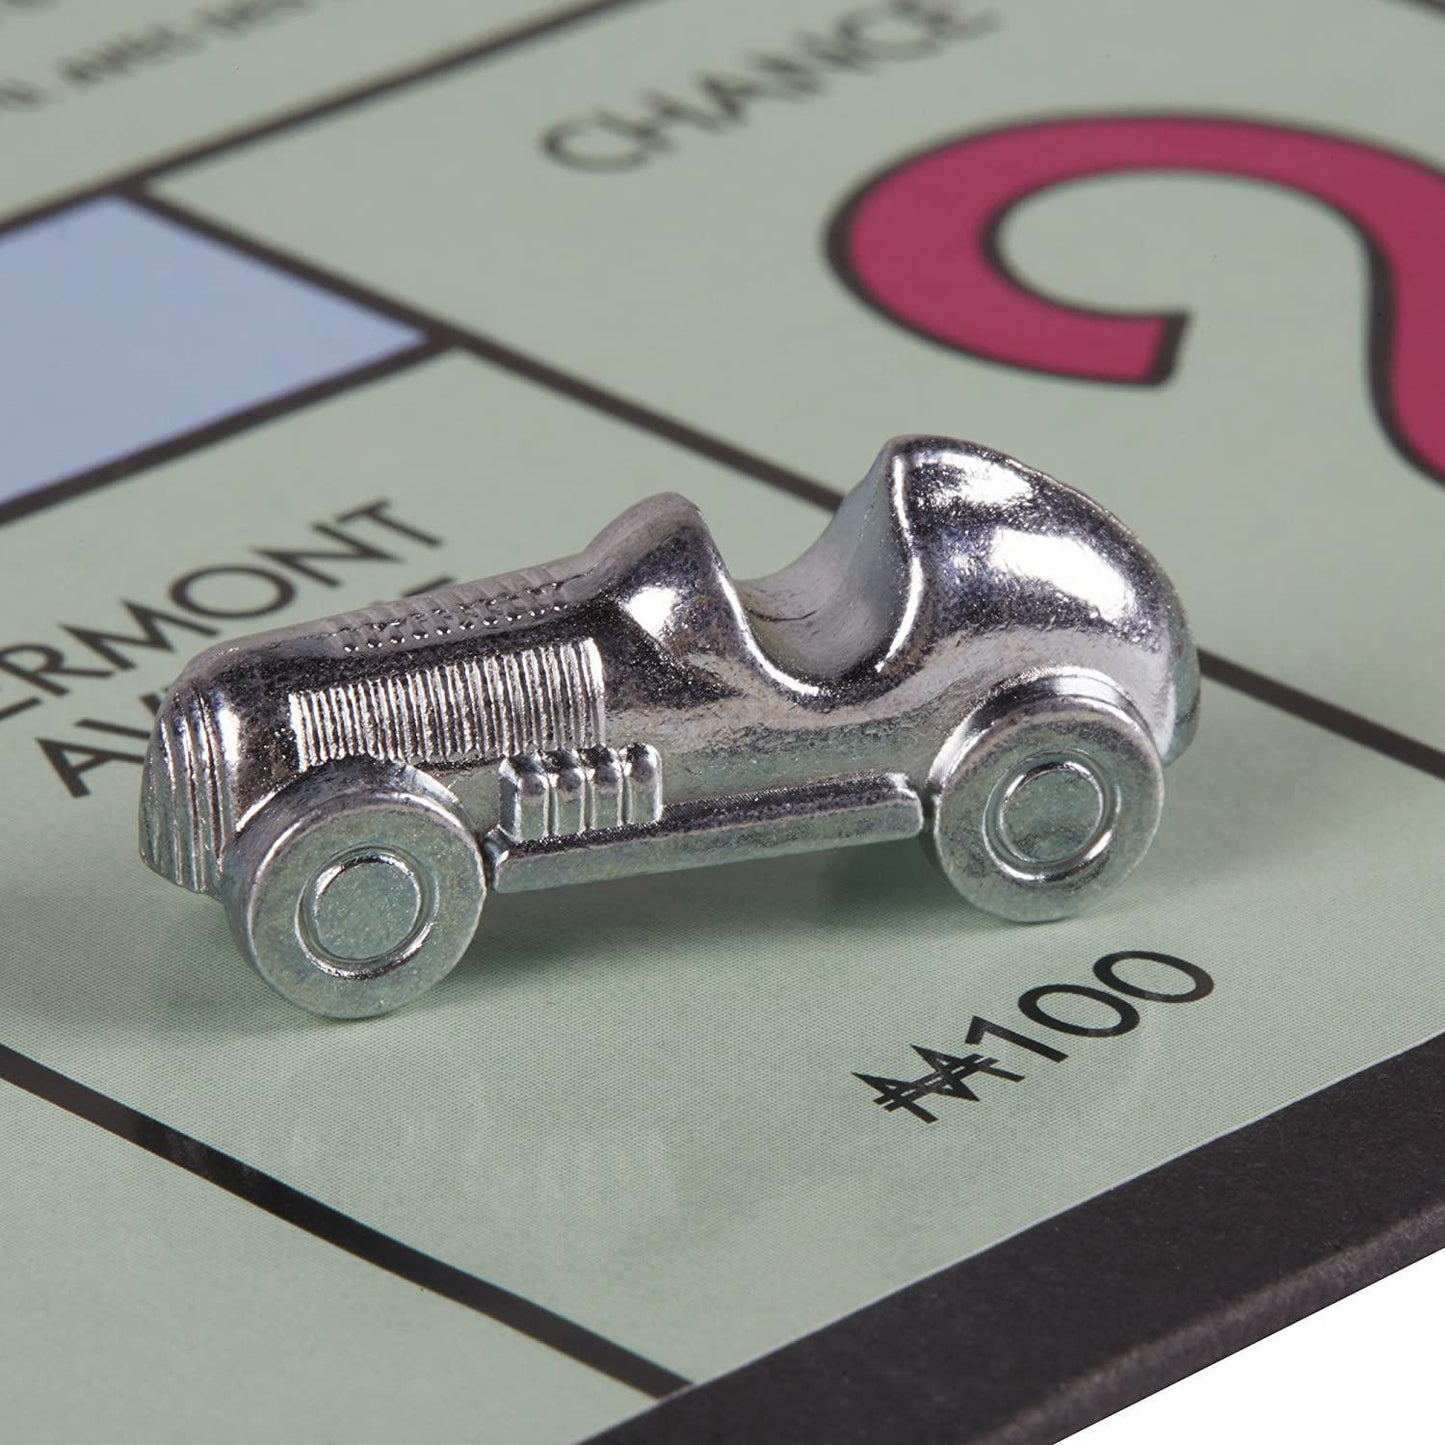 Monopoly Classic Board Game Featuring Rubber Ducky, Tyrannosaurus Rex, and Penguin - Great Family Gift